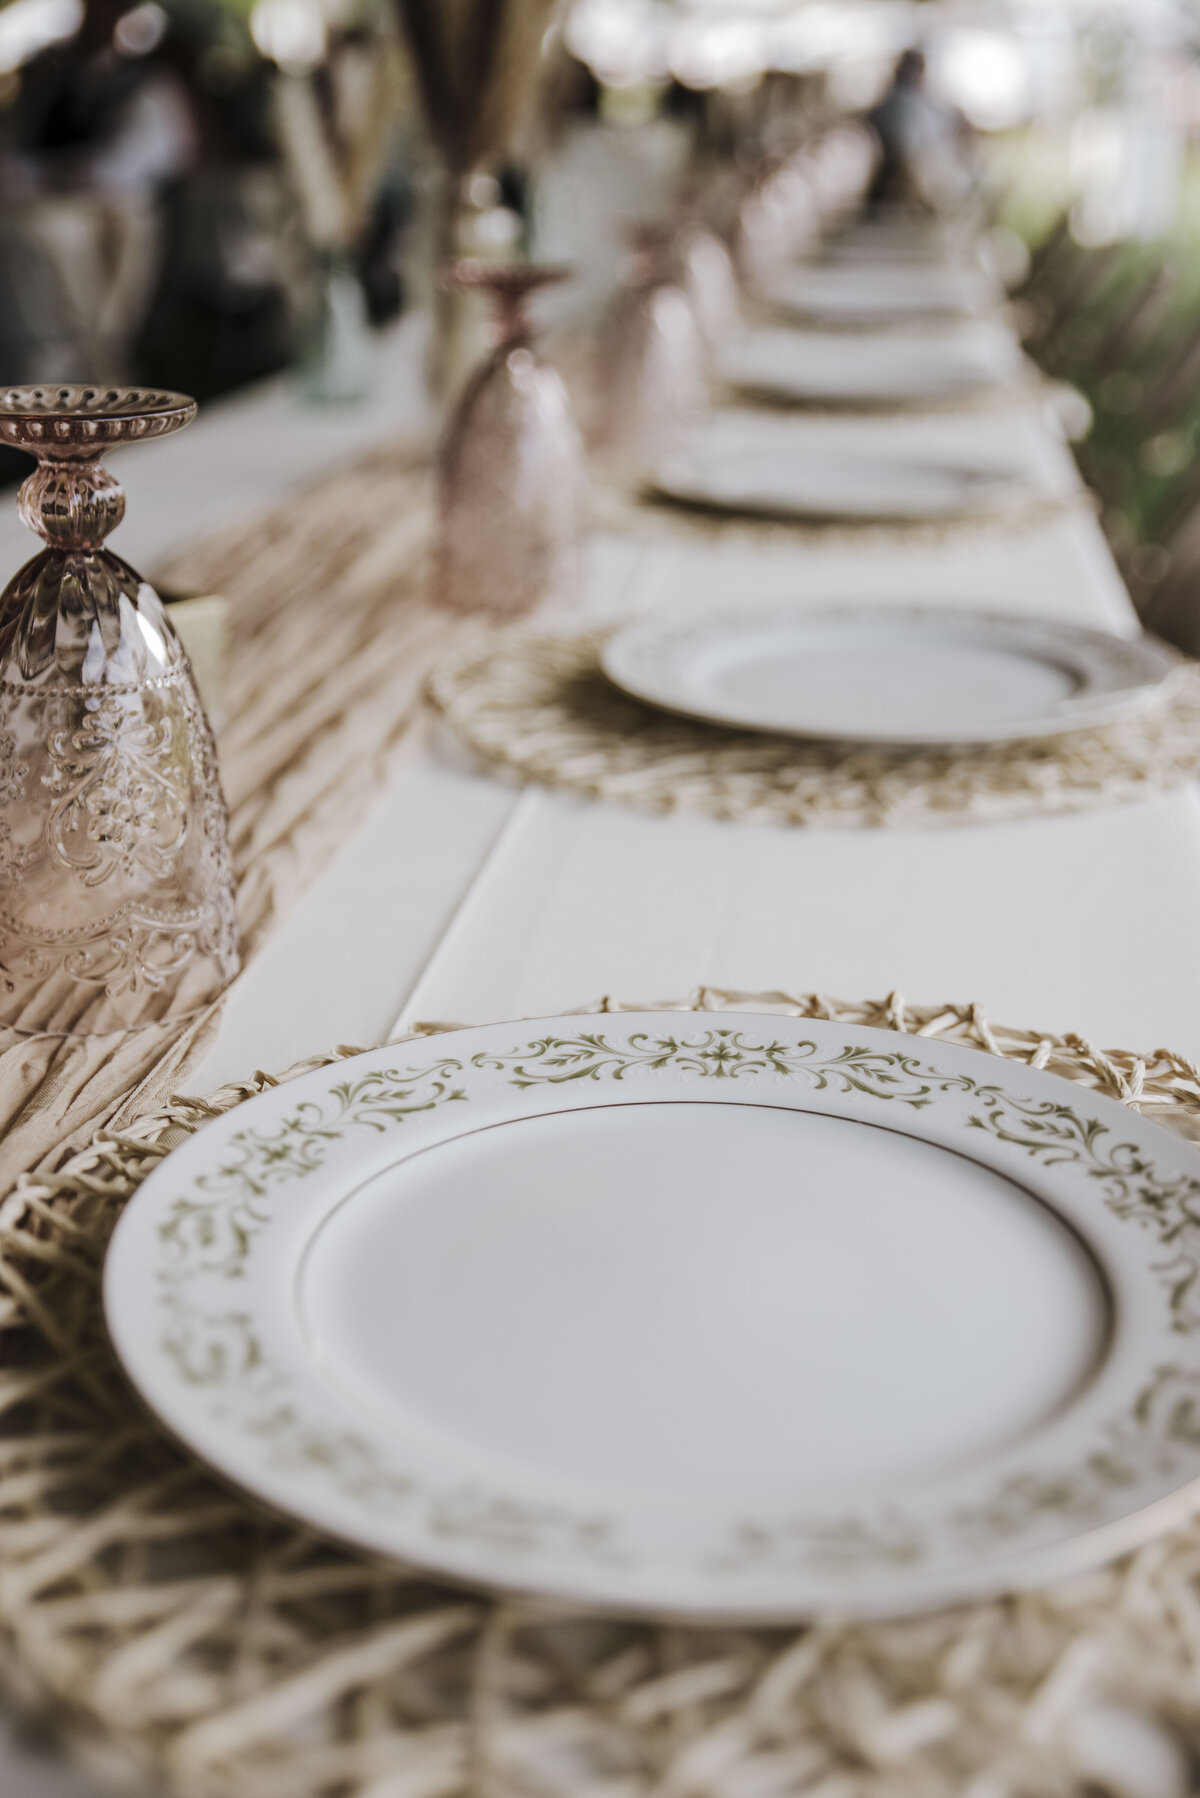 Elegant outdoor dining setup featuring a table adorned with lace and ornate plates, ready for a refined al fresco experience taken by jen Jarmuzek photography a Minneapolis wedding photographer